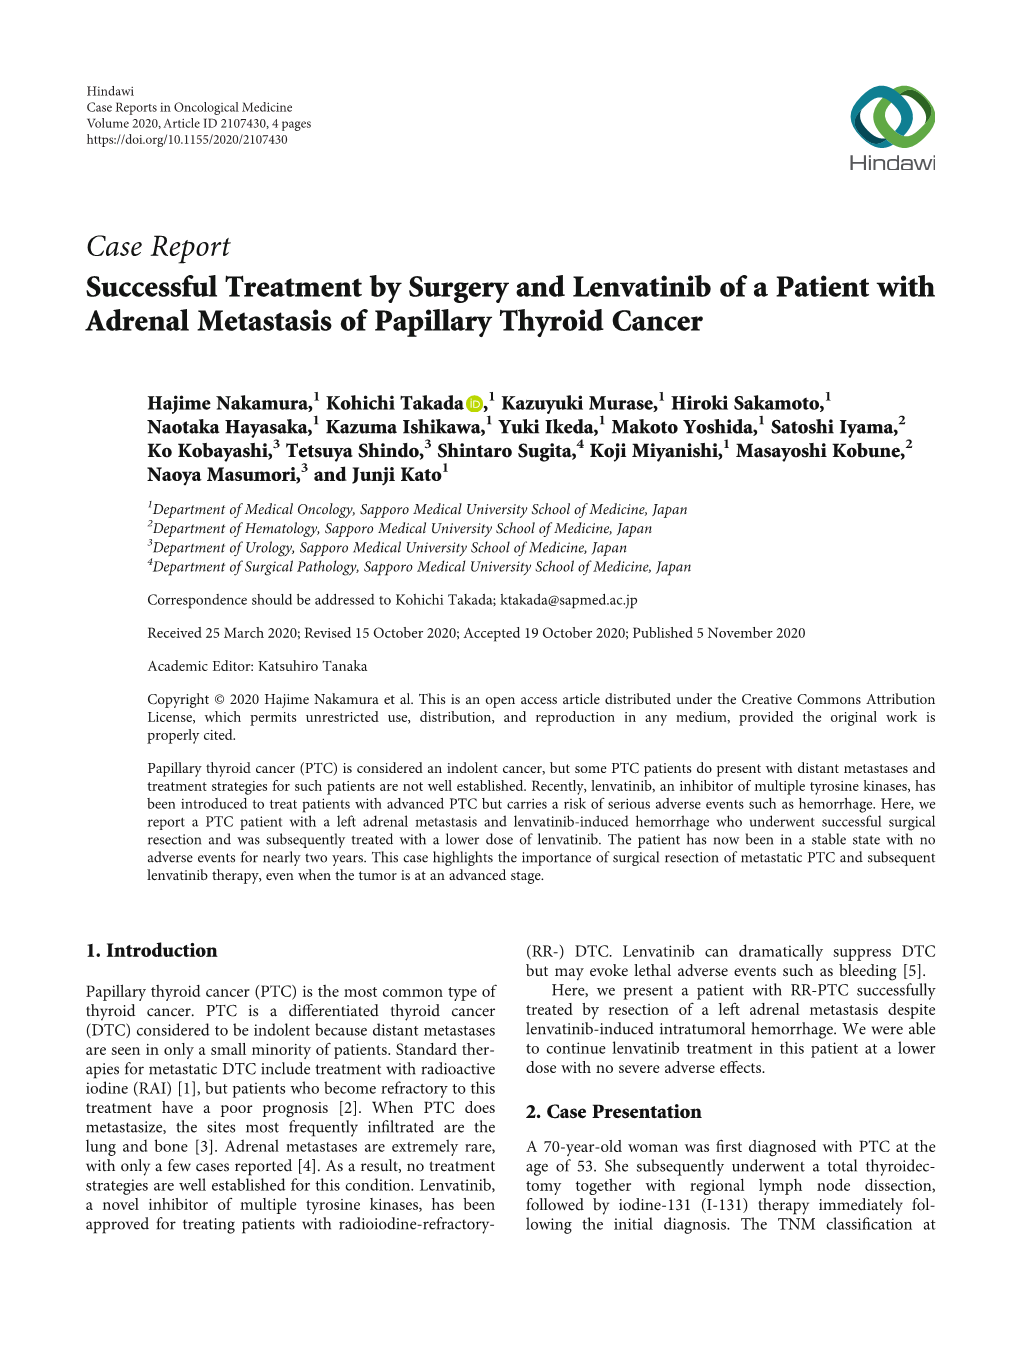 Successful Treatment by Surgery and Lenvatinib of a Patient with Adrenal Metastasis of Papillary Thyroid Cancer